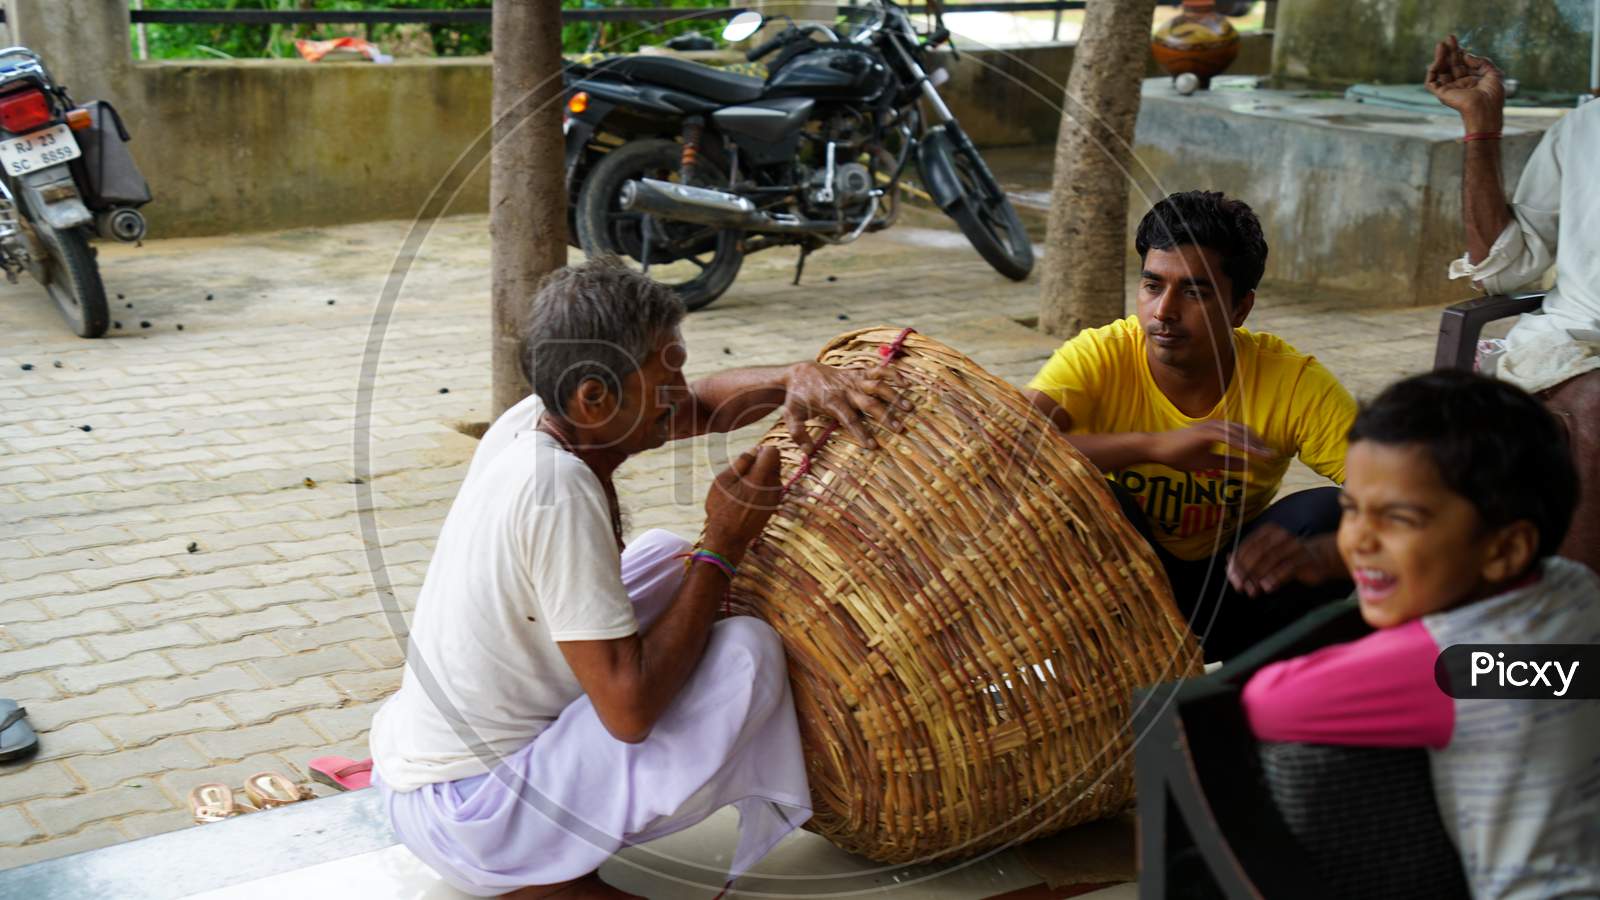 Rural India Basket Made From Mulberry Branches.